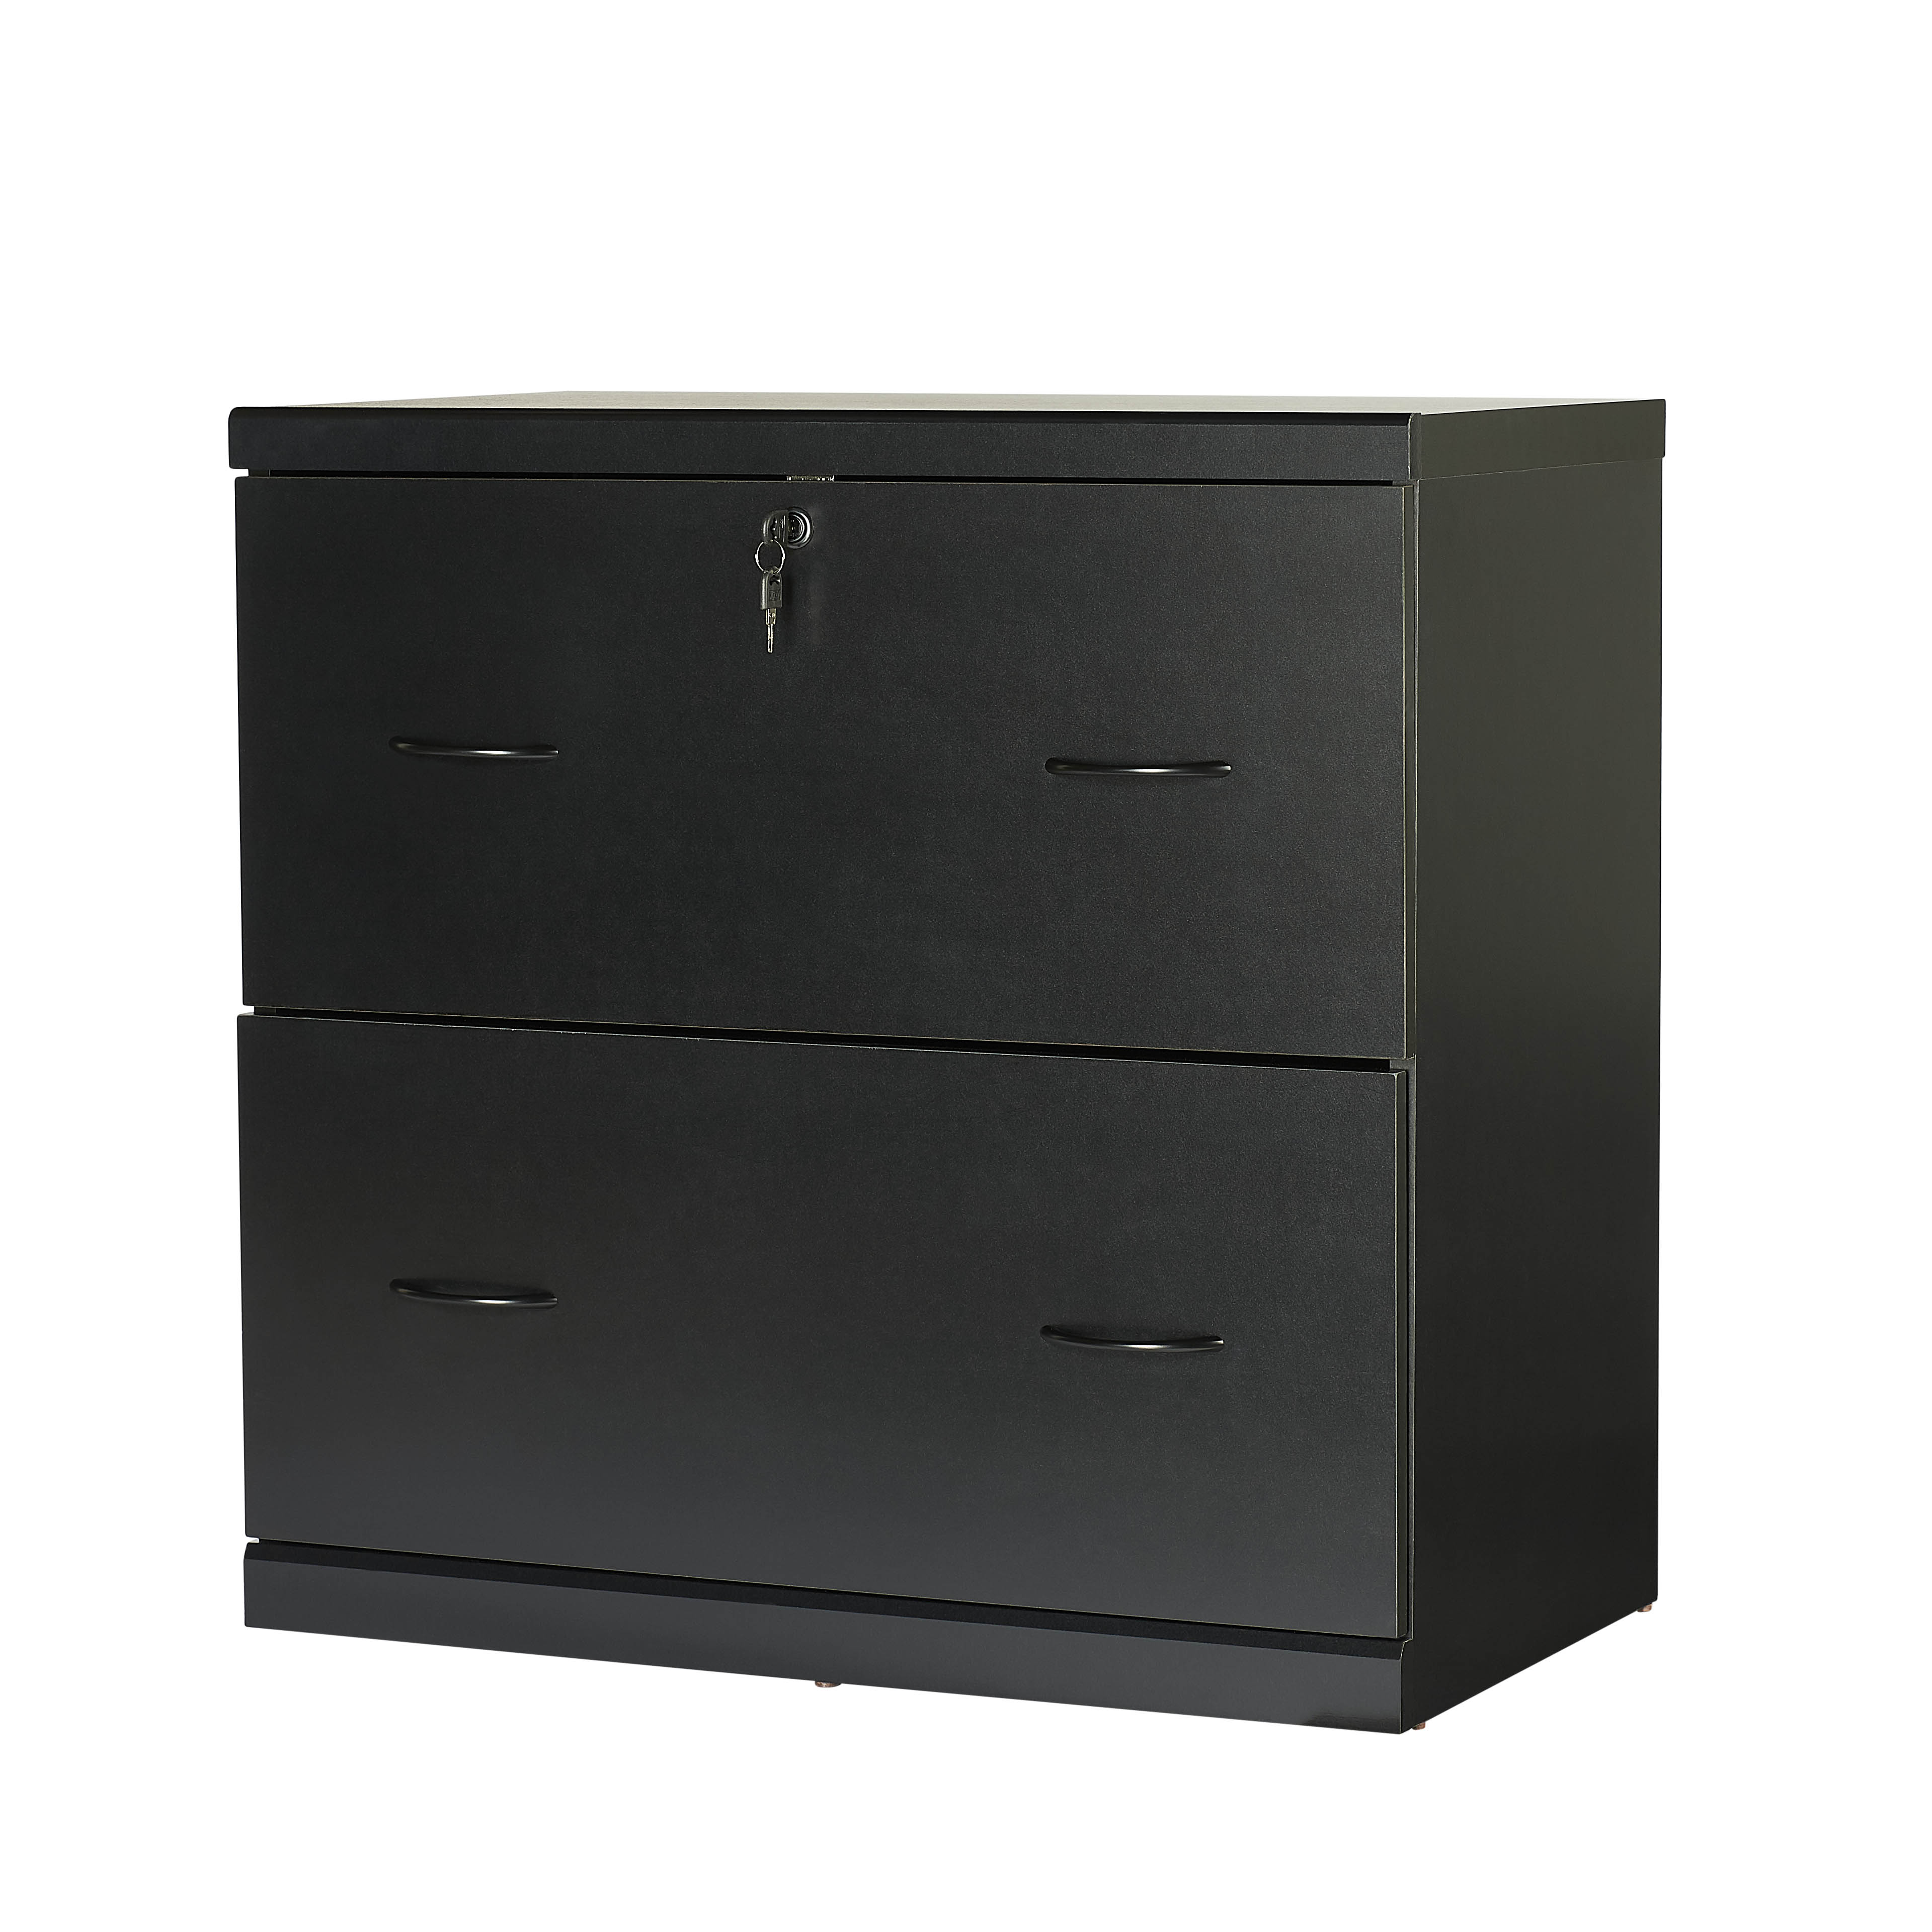 Mainstays 2 Drawer Lateral Locking File Cabinet Walmart intended for sizing 3840 X 3840